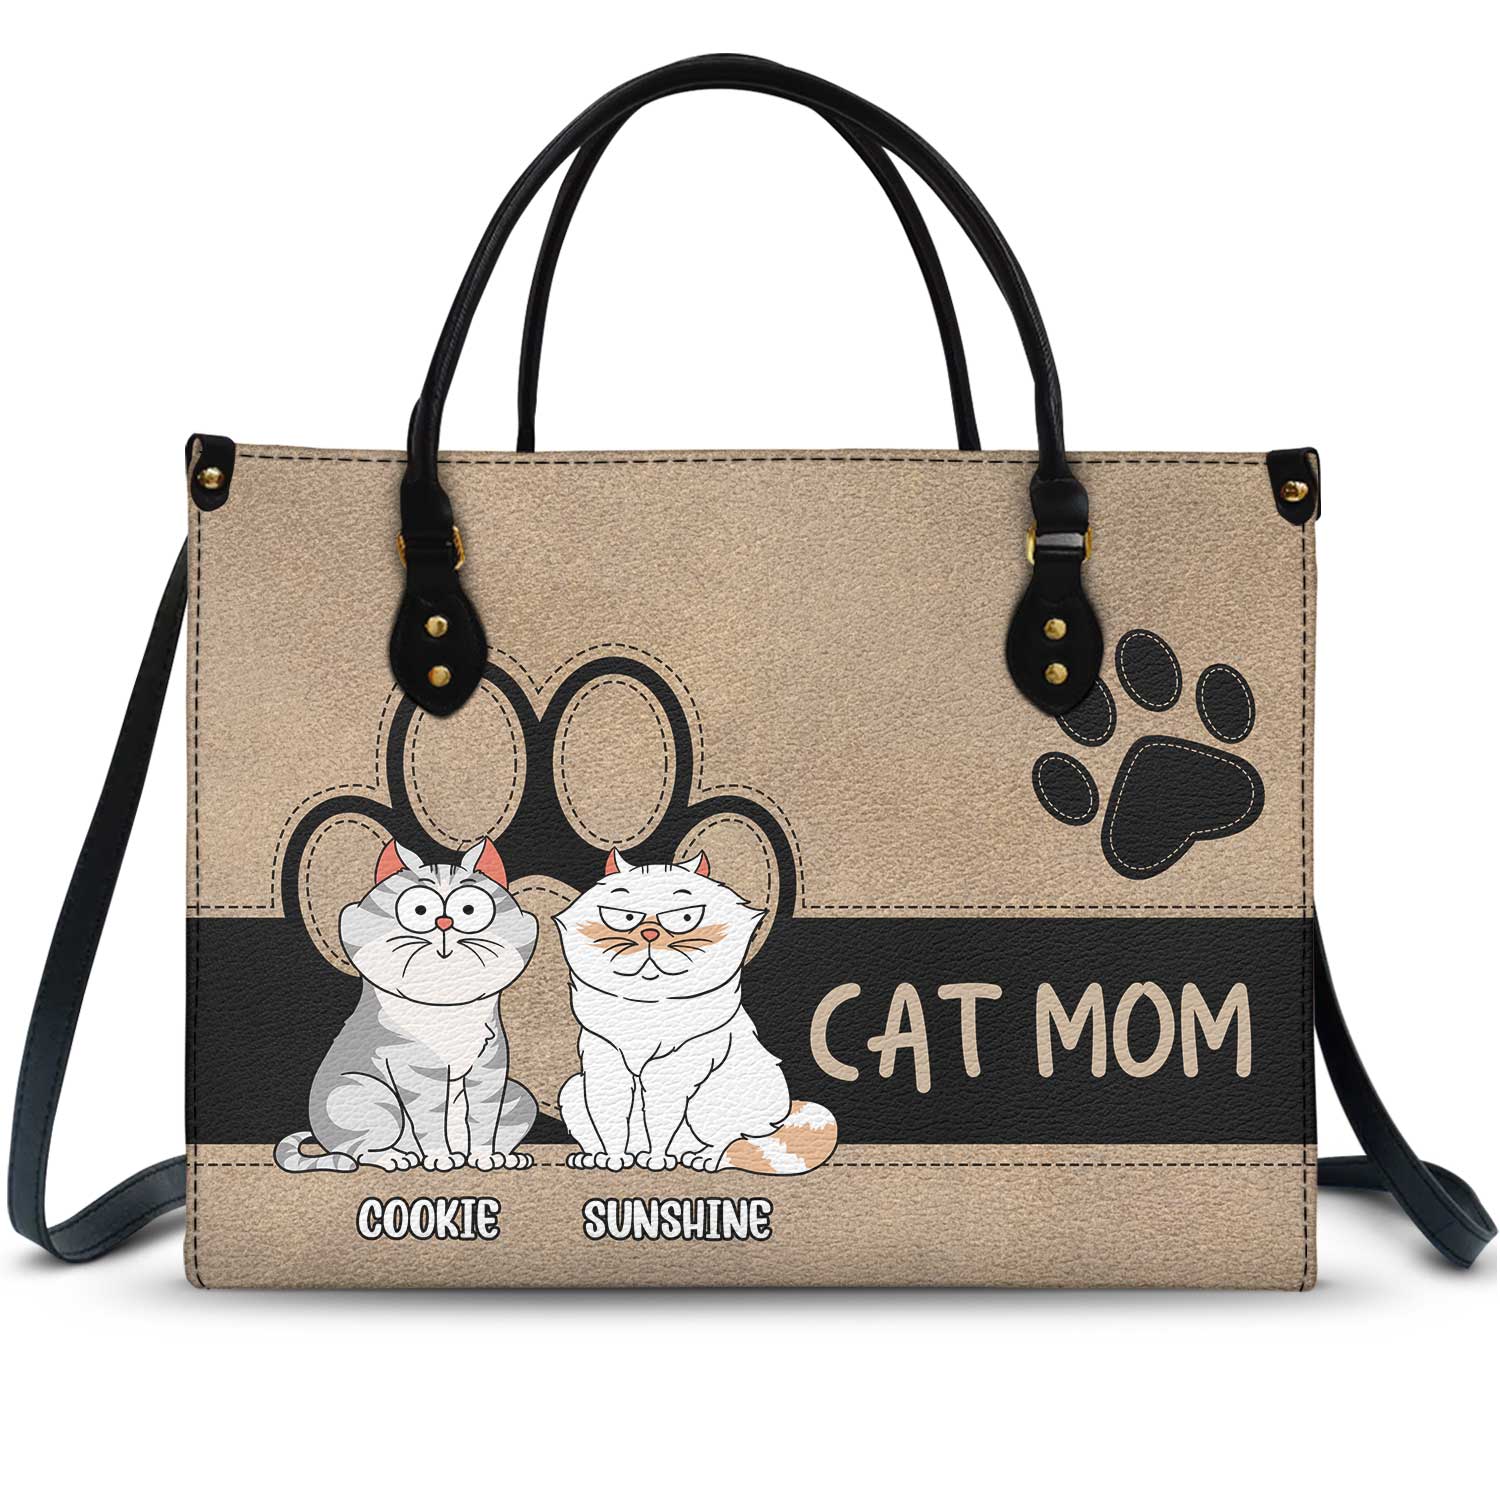 Cat Mom Funny Cartoon Style - Gift For Cat Lovers - Personalized Leather Bag